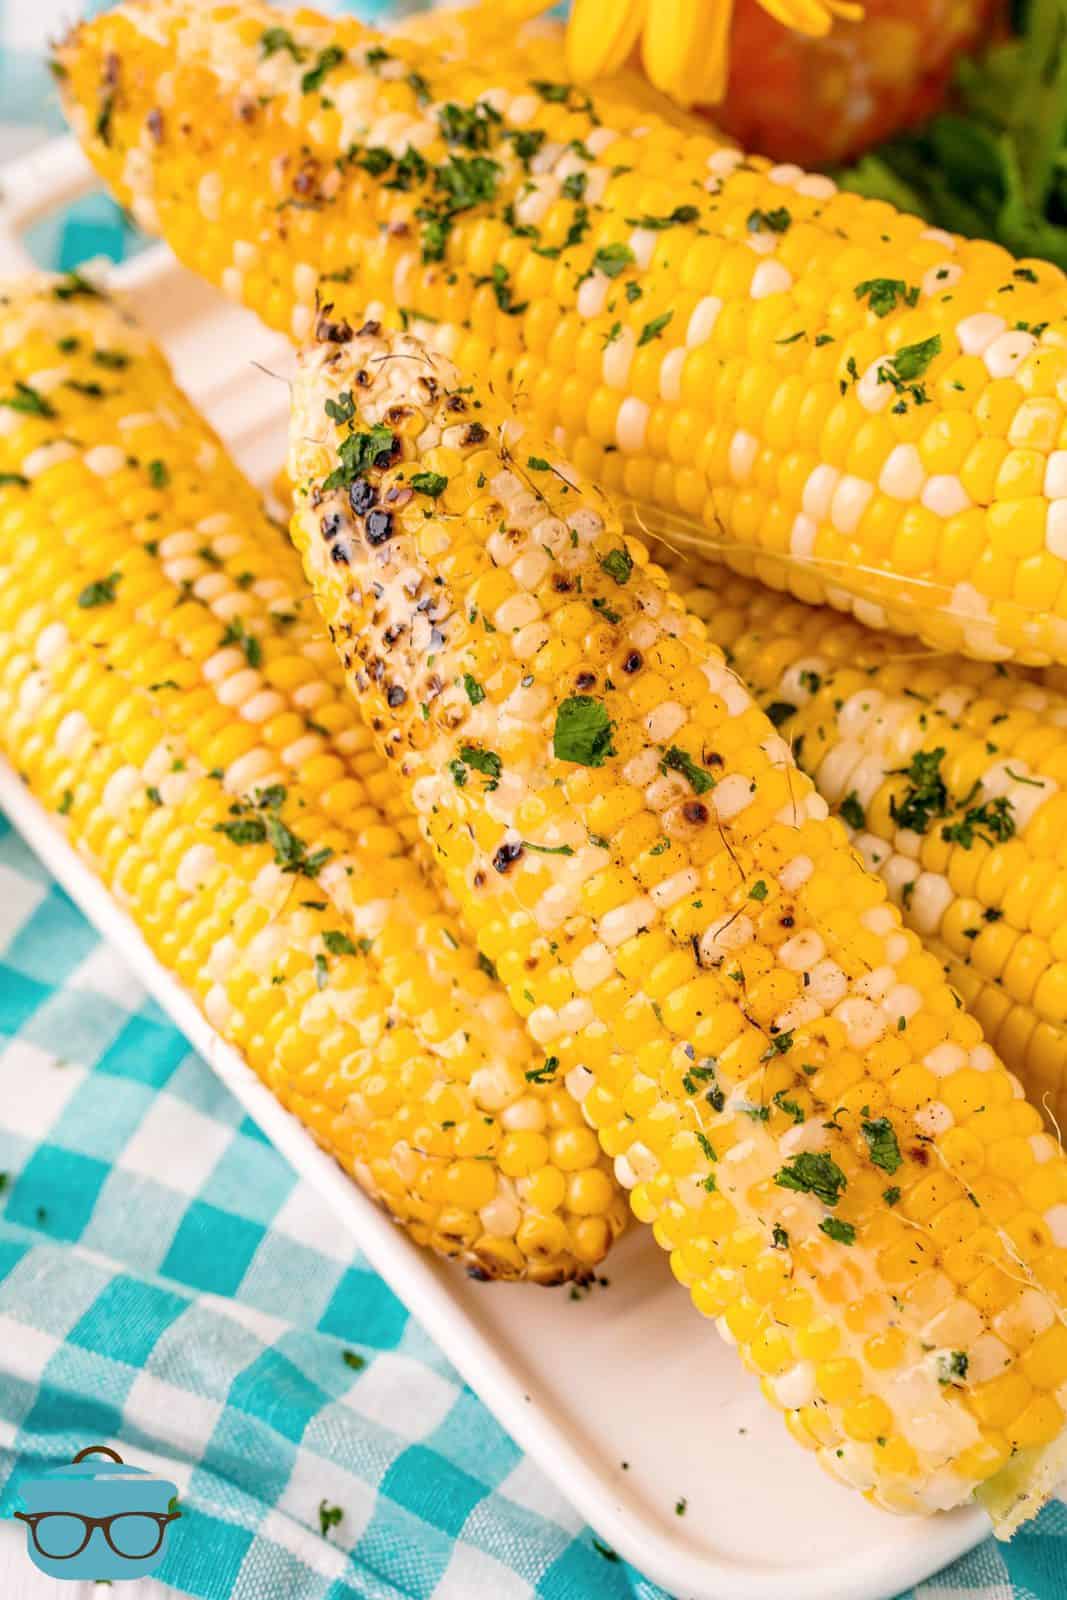 Overhead of Grilled Corn showing butter and herbs.